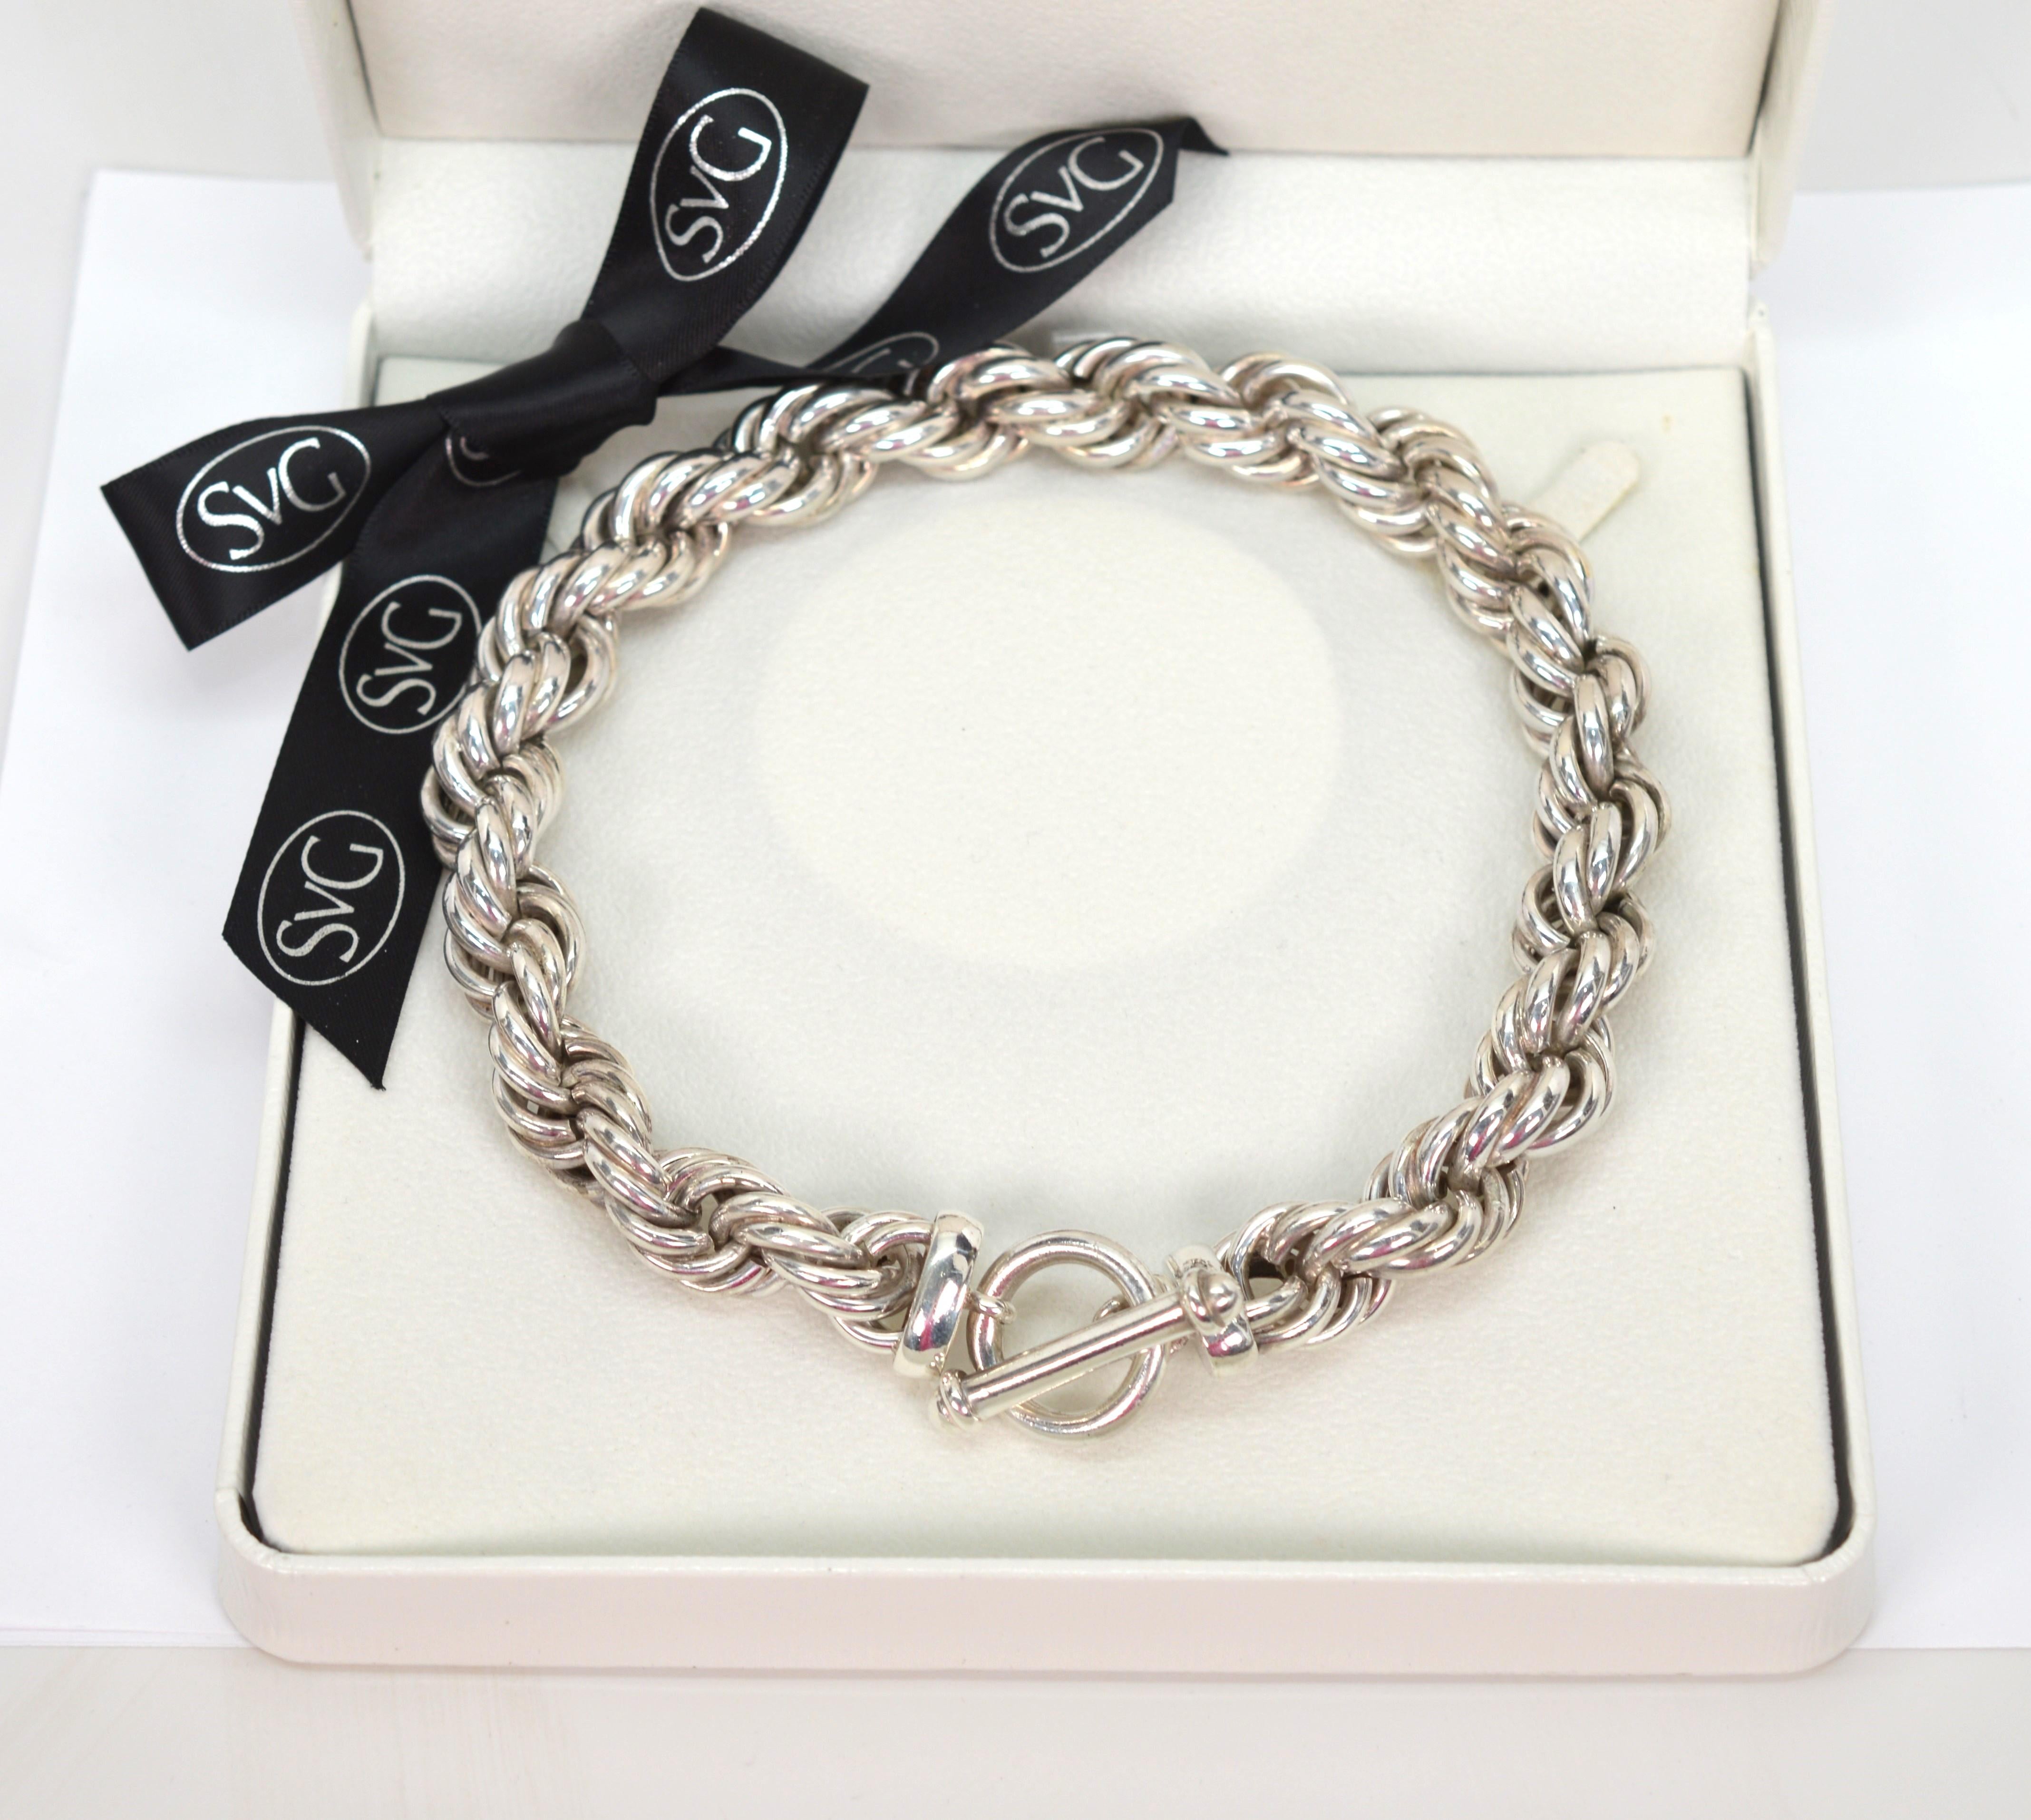 Sterling Silver Chunky Twist Rope Chain Necklace w Toggle Clasp In Good Condition For Sale In Mount Kisco, NY